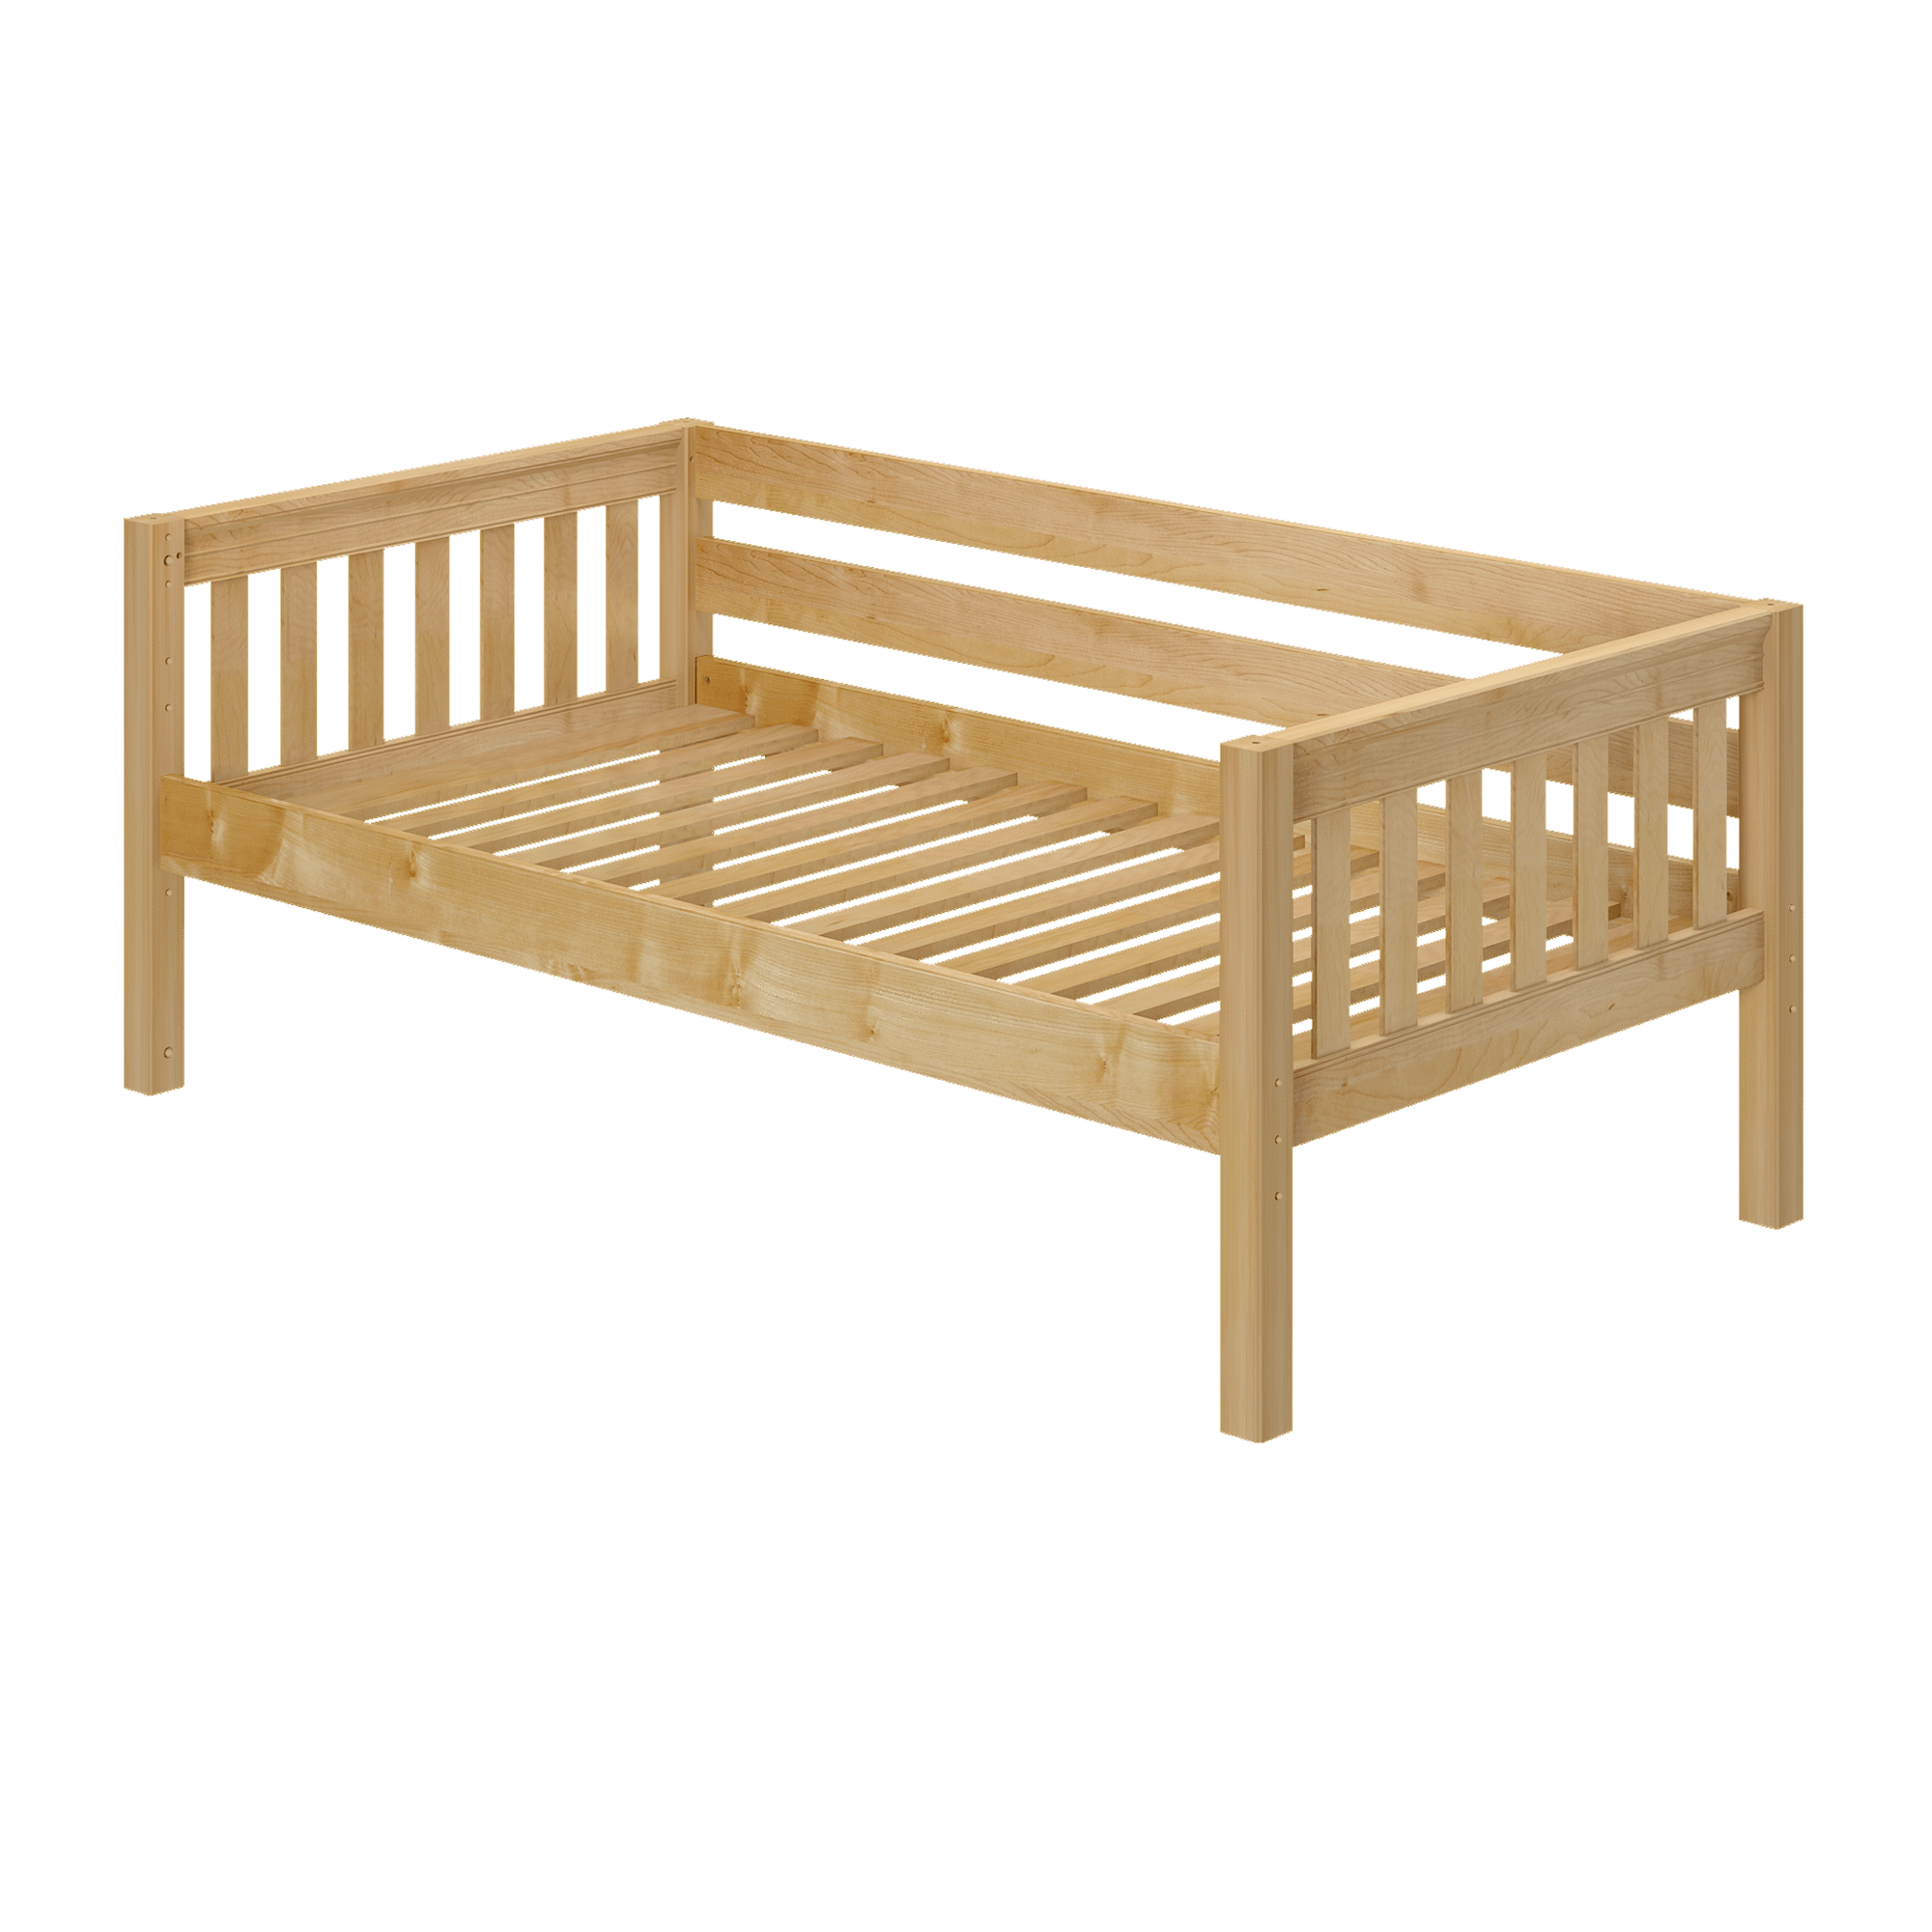 Maxtrix Twin Day Bed